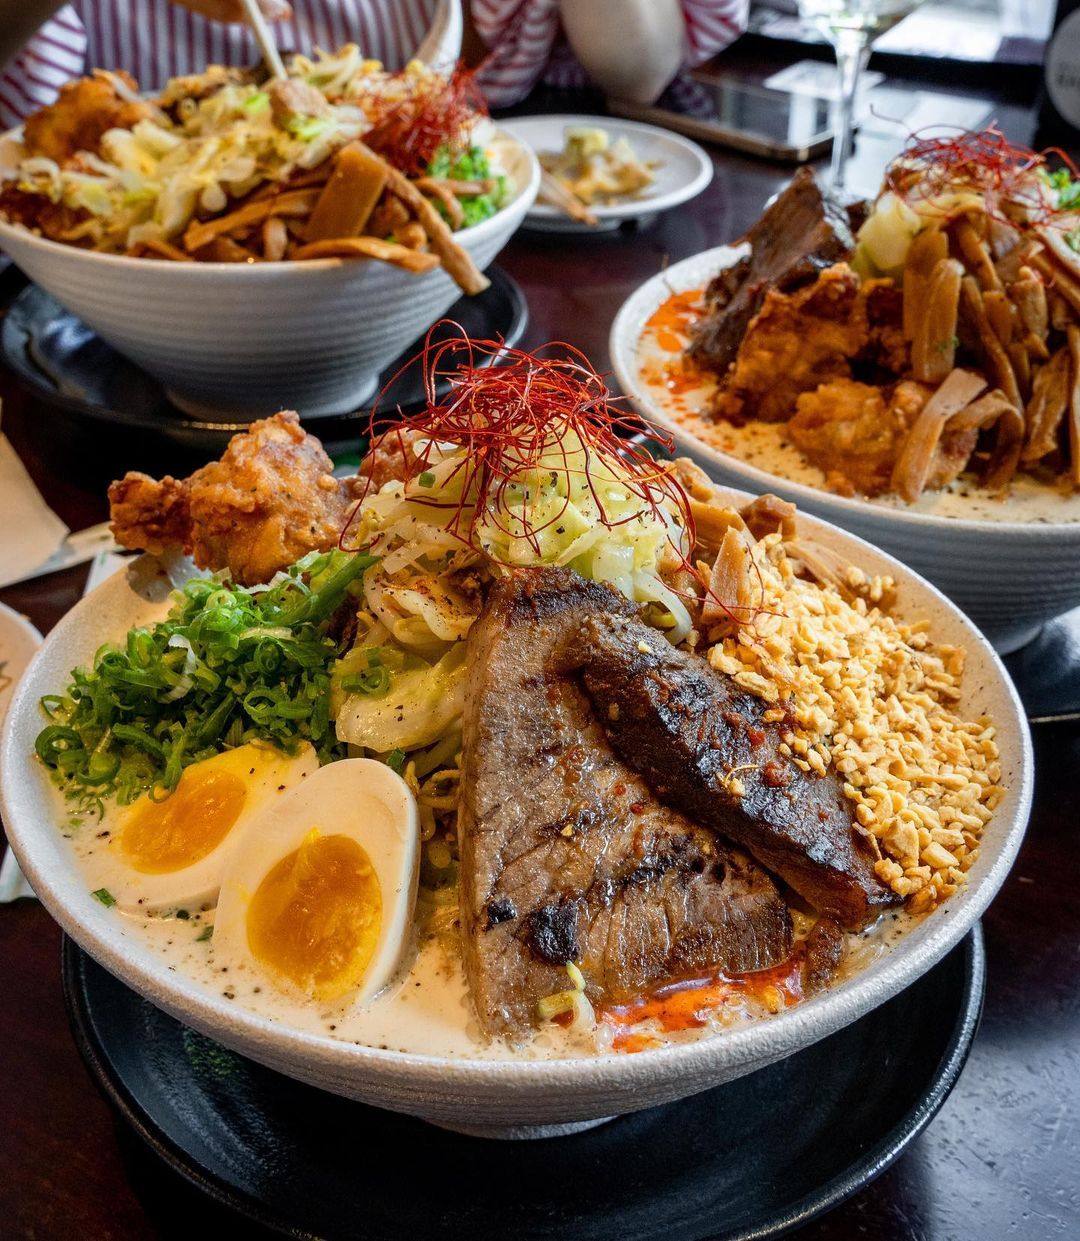 Join us in celebrating two years of Kamitoku Ramen in Ward Village! Enjoy Gyu-kotsu ramen in fresh new flavors and other specials from Friday, March 31 through Sunday, April 2.